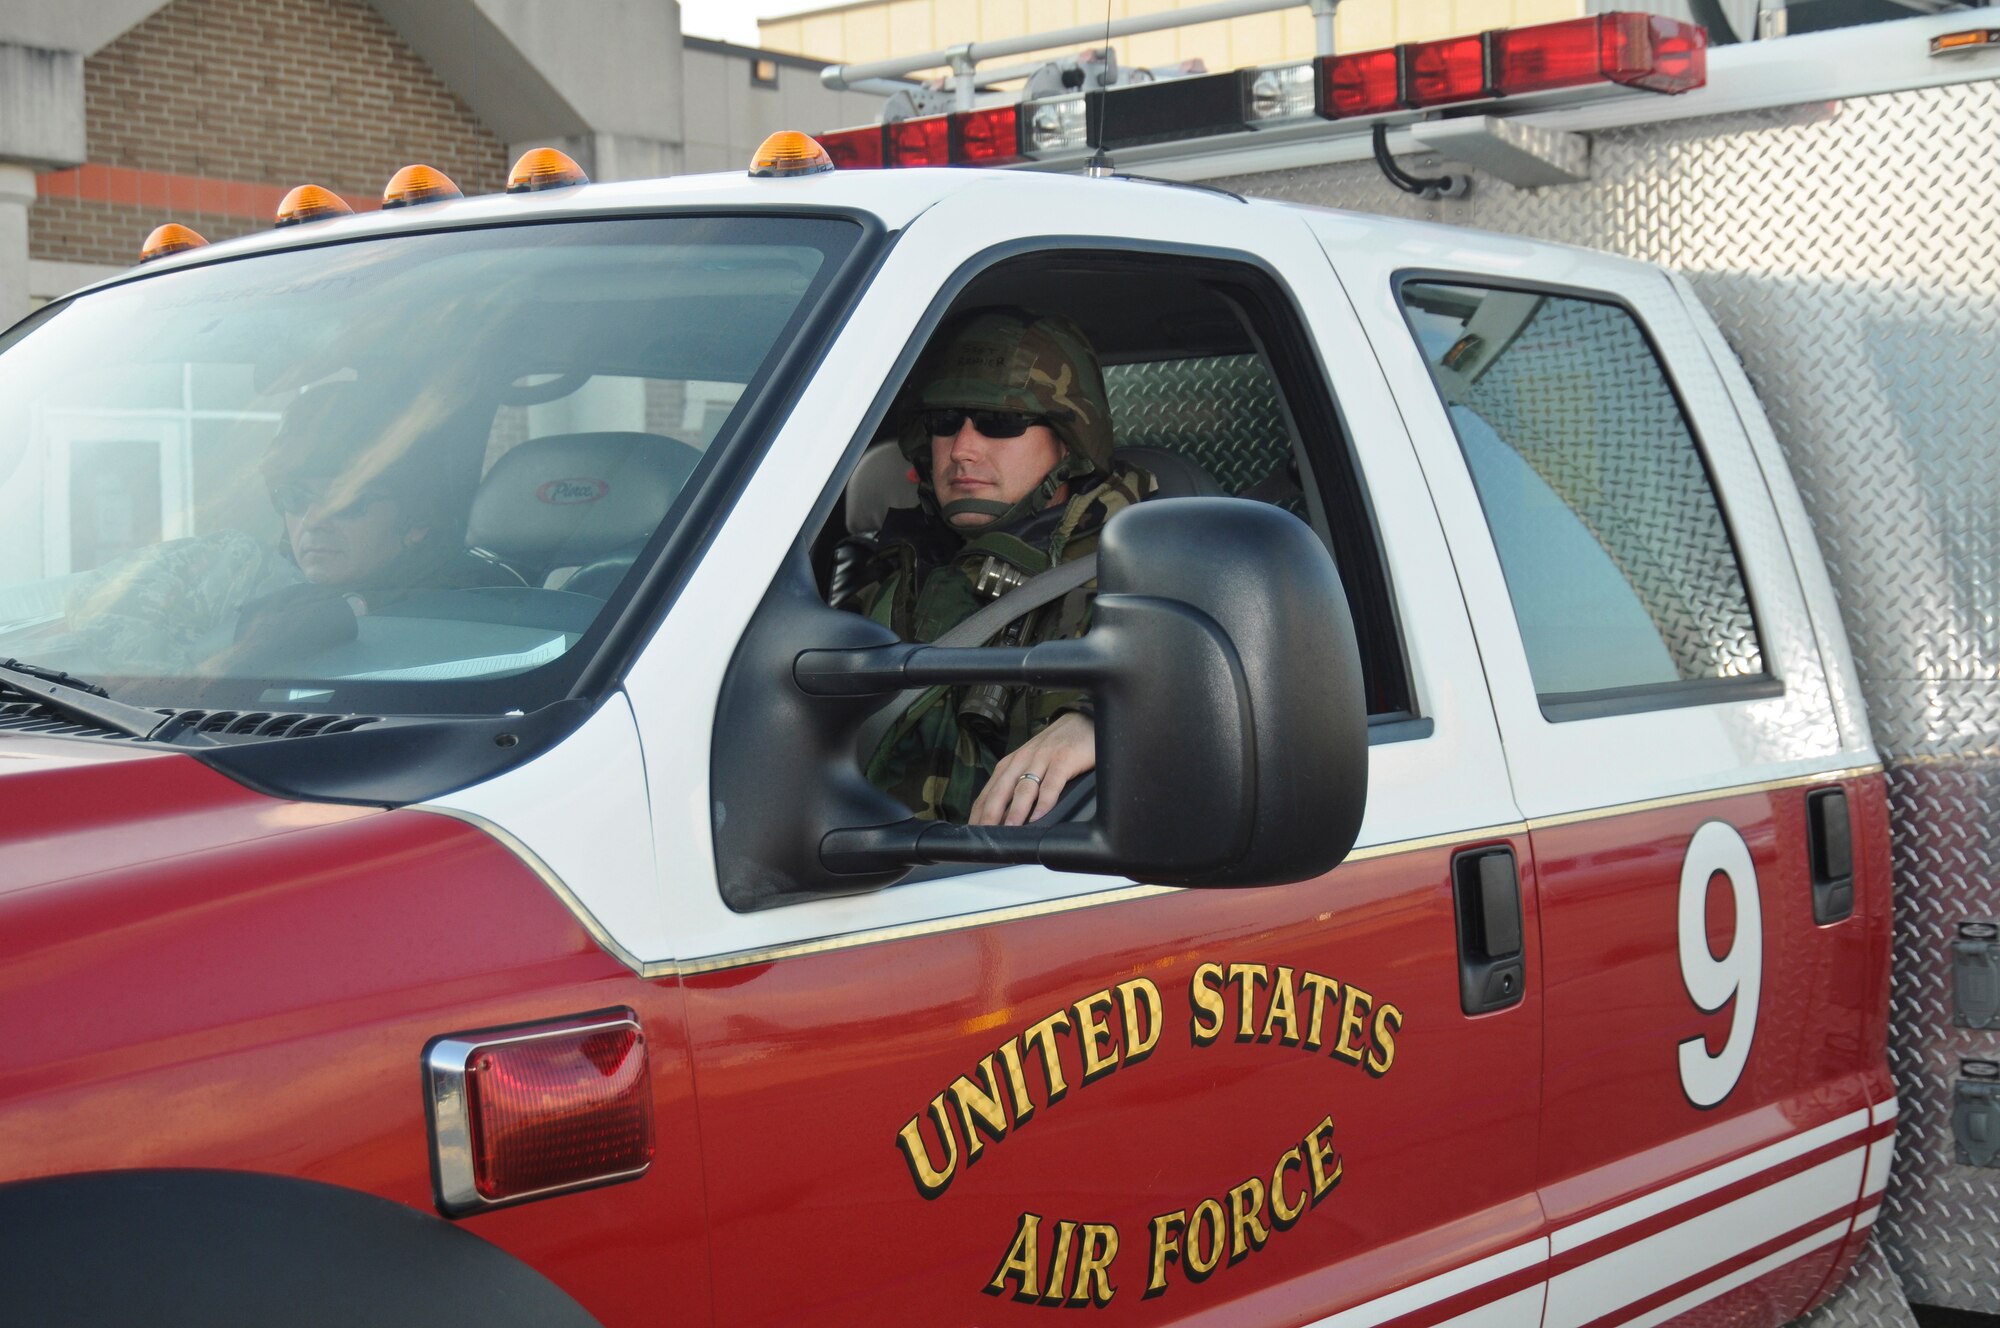 Staff Sgt. Ronald Renner, a firefighter from the 123rd Airlift Wing Fire Department, sits at the ready to respond to any on-base emergencies May 20, 2010 at the Gulfport Combat Readiness Training Center in Gulfport, Miss.  The wing was being evaluated as part of the U.S. Force's first-ever homeland security/homeland defense Operational Readiness Inspection. (U.S. Air Force photo/Tech. Sgt. Dennis Flora) (Released)